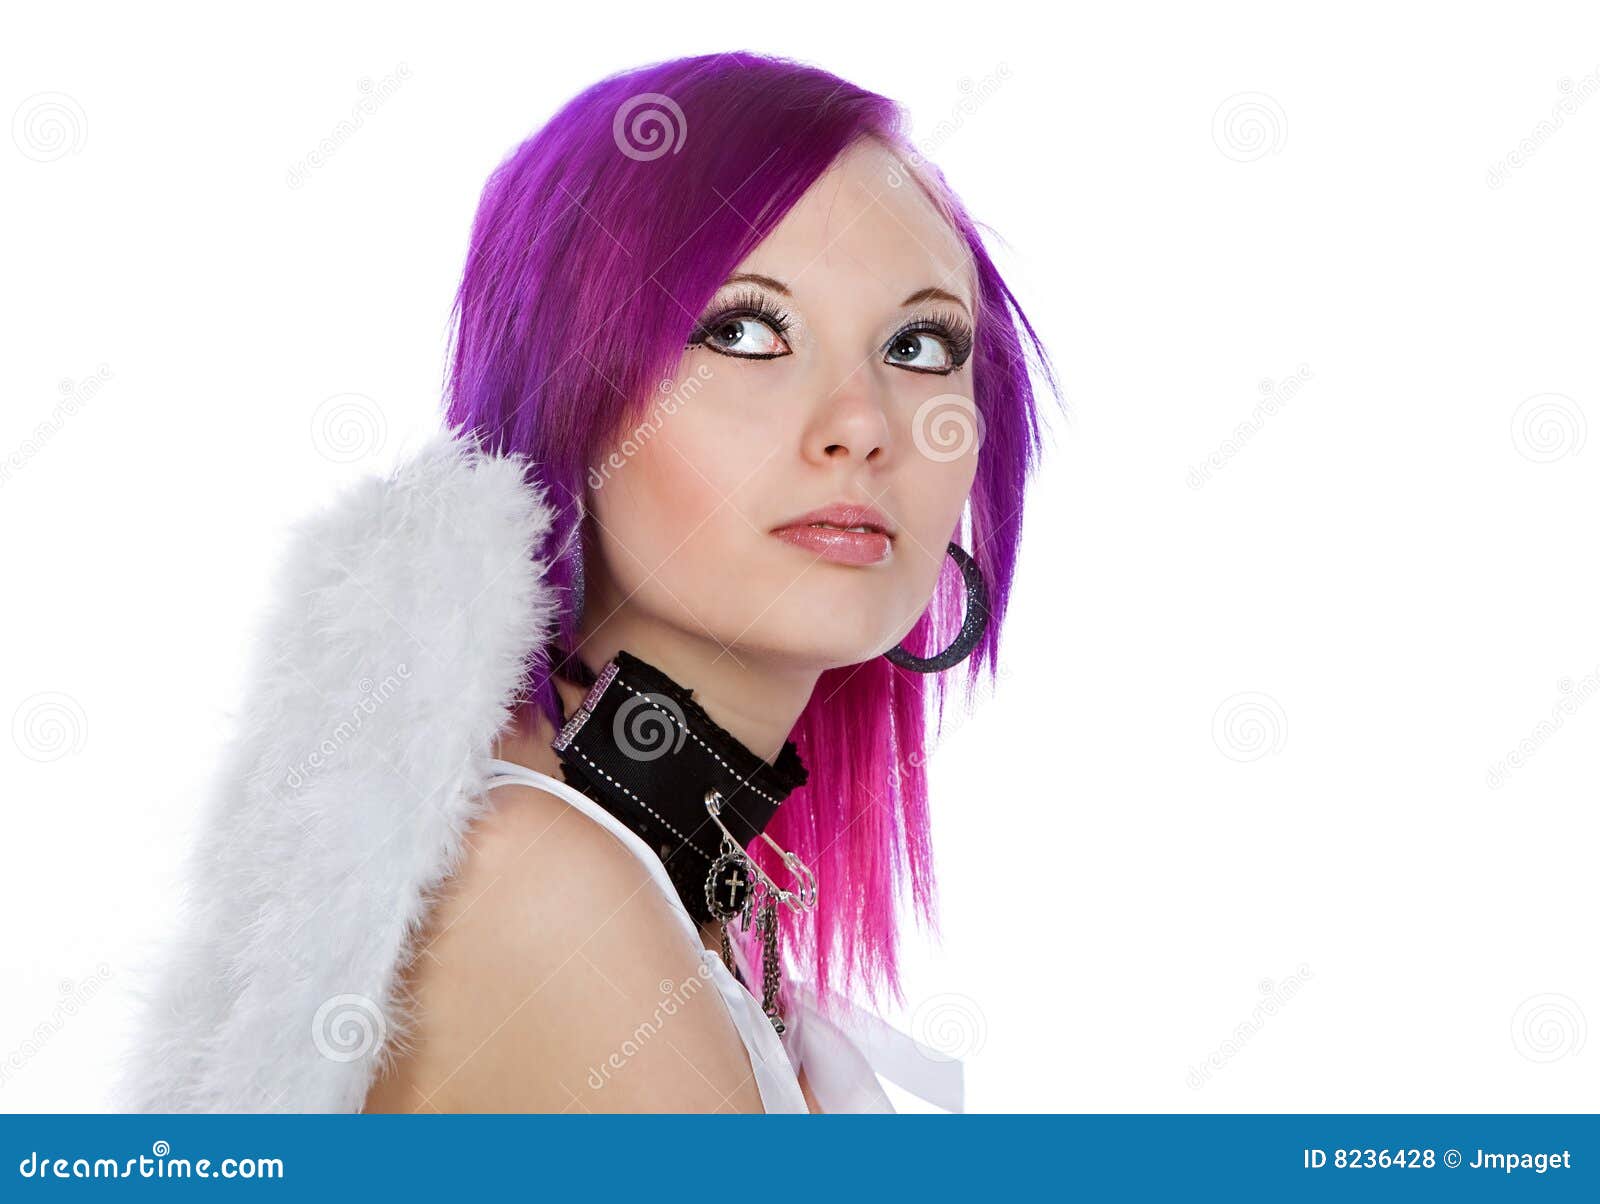 473 Angel Wings Hairstyle Stock Photos - Free & Royalty-Free Stock Photos  from Dreamstime